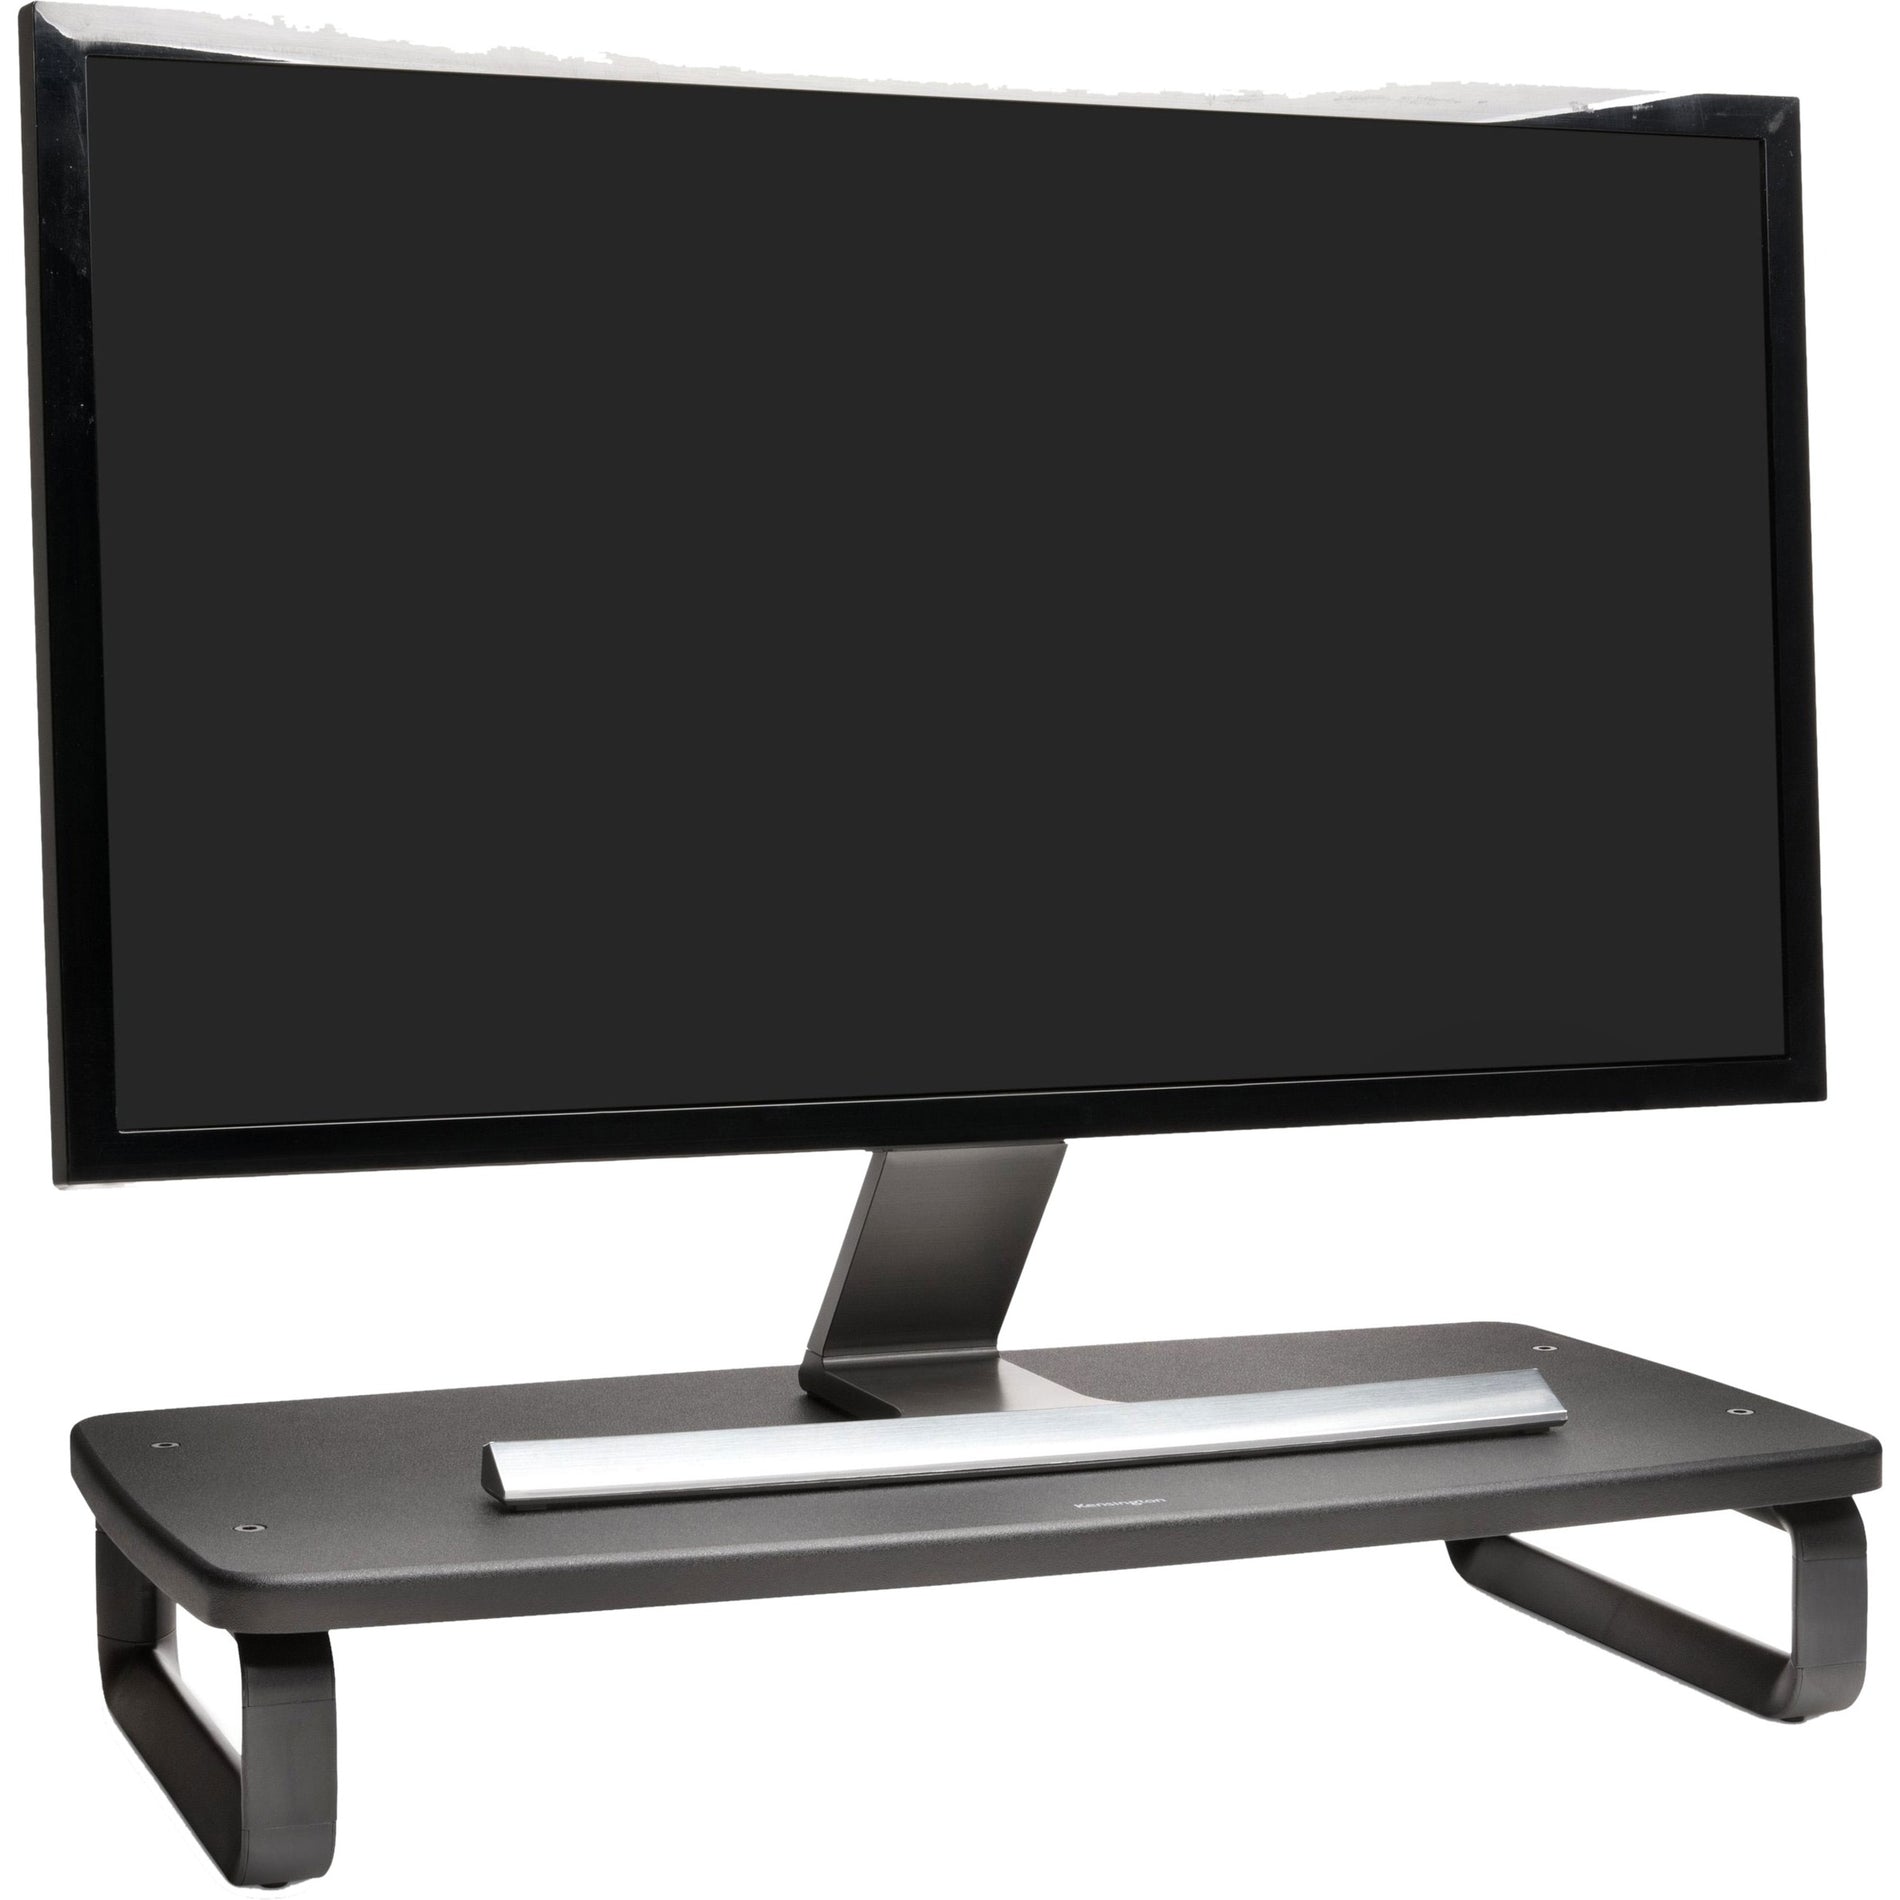 Kensington K52797WW SmartFit Extra Wide Monitor Stand for up to 27" screens, Black